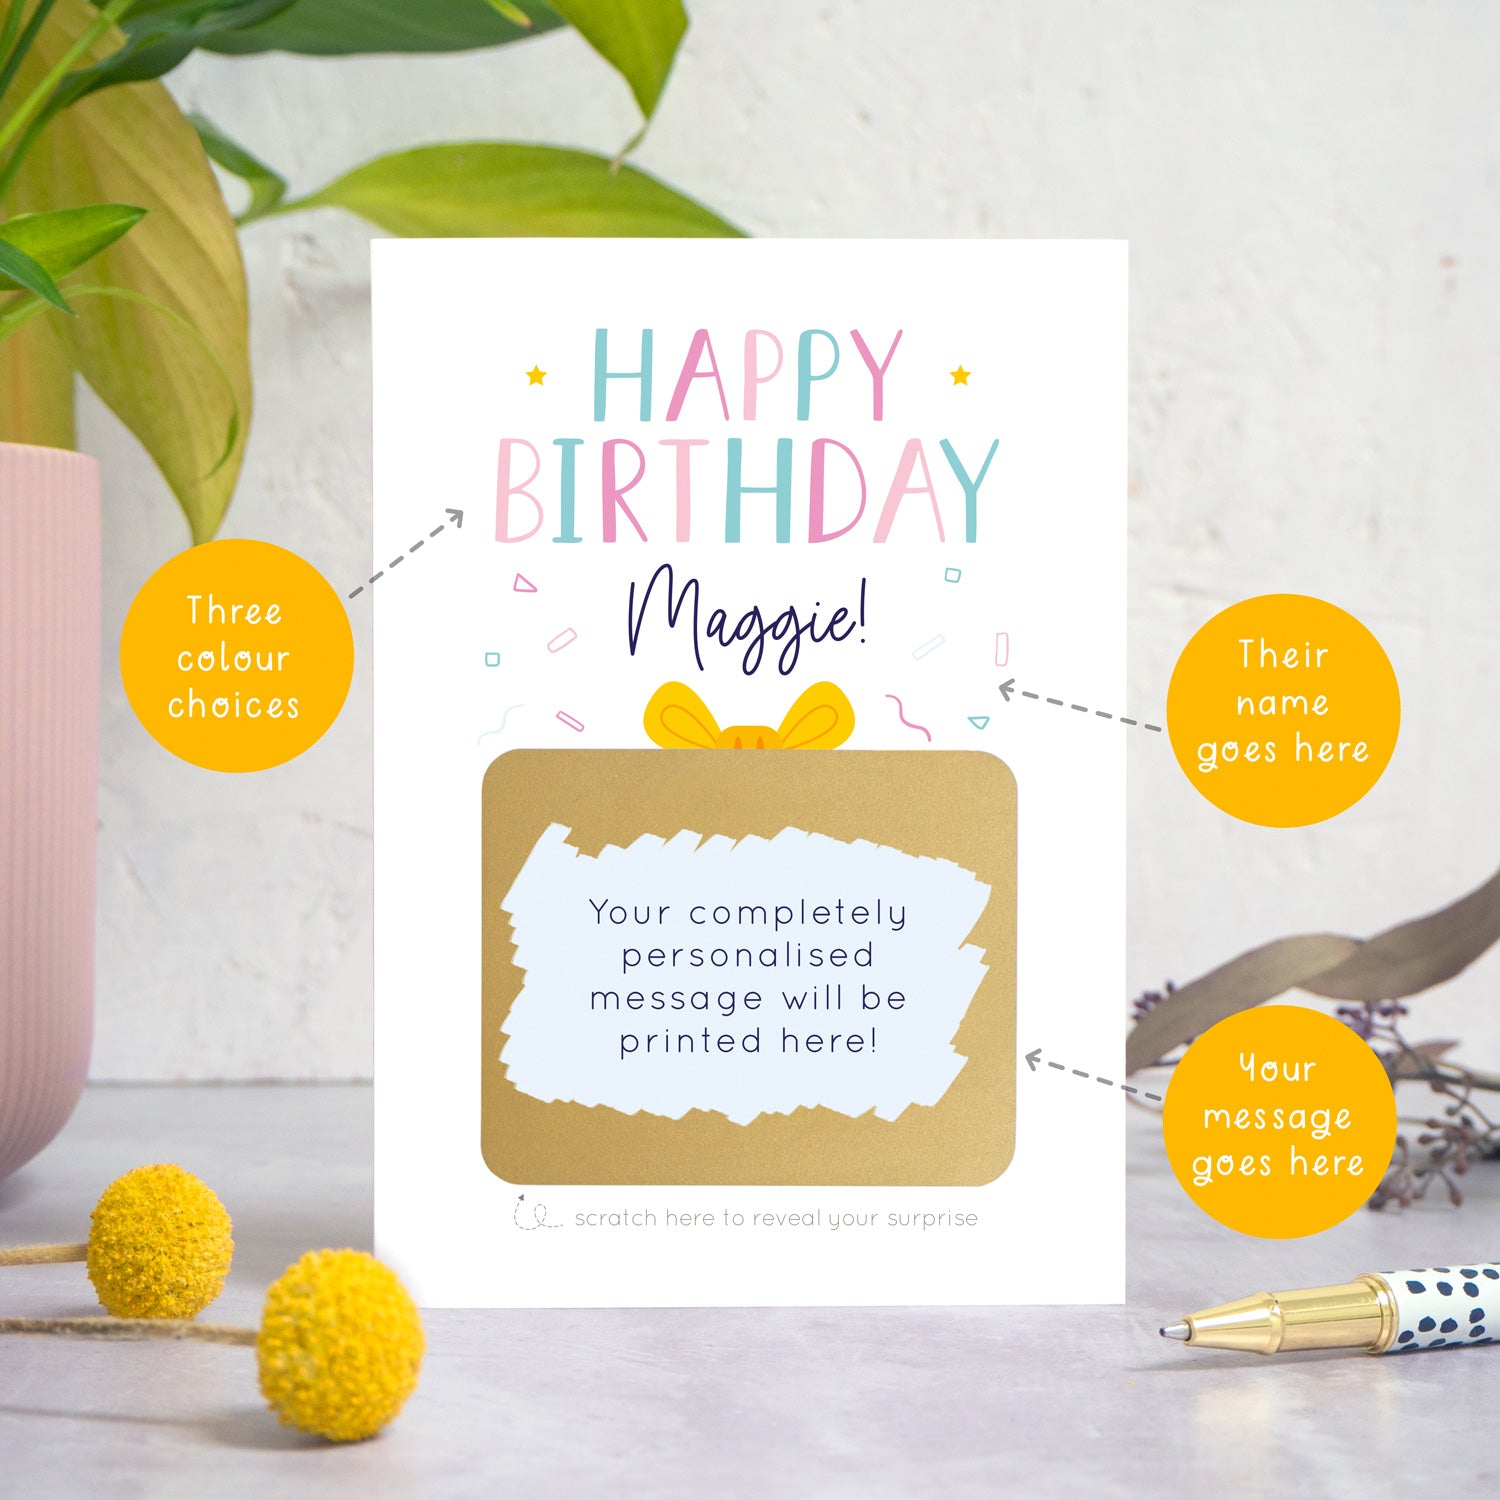 A personalised happy birthday scratch card in pink that has been photographed on a white and grey background with foliage and a pen in both the foreground and background. There are also orange circles laid over the top of this image with arrows pointing to the areas that can be customised. In this instance they point to the name, the colour choices and the personalised scratch off message.